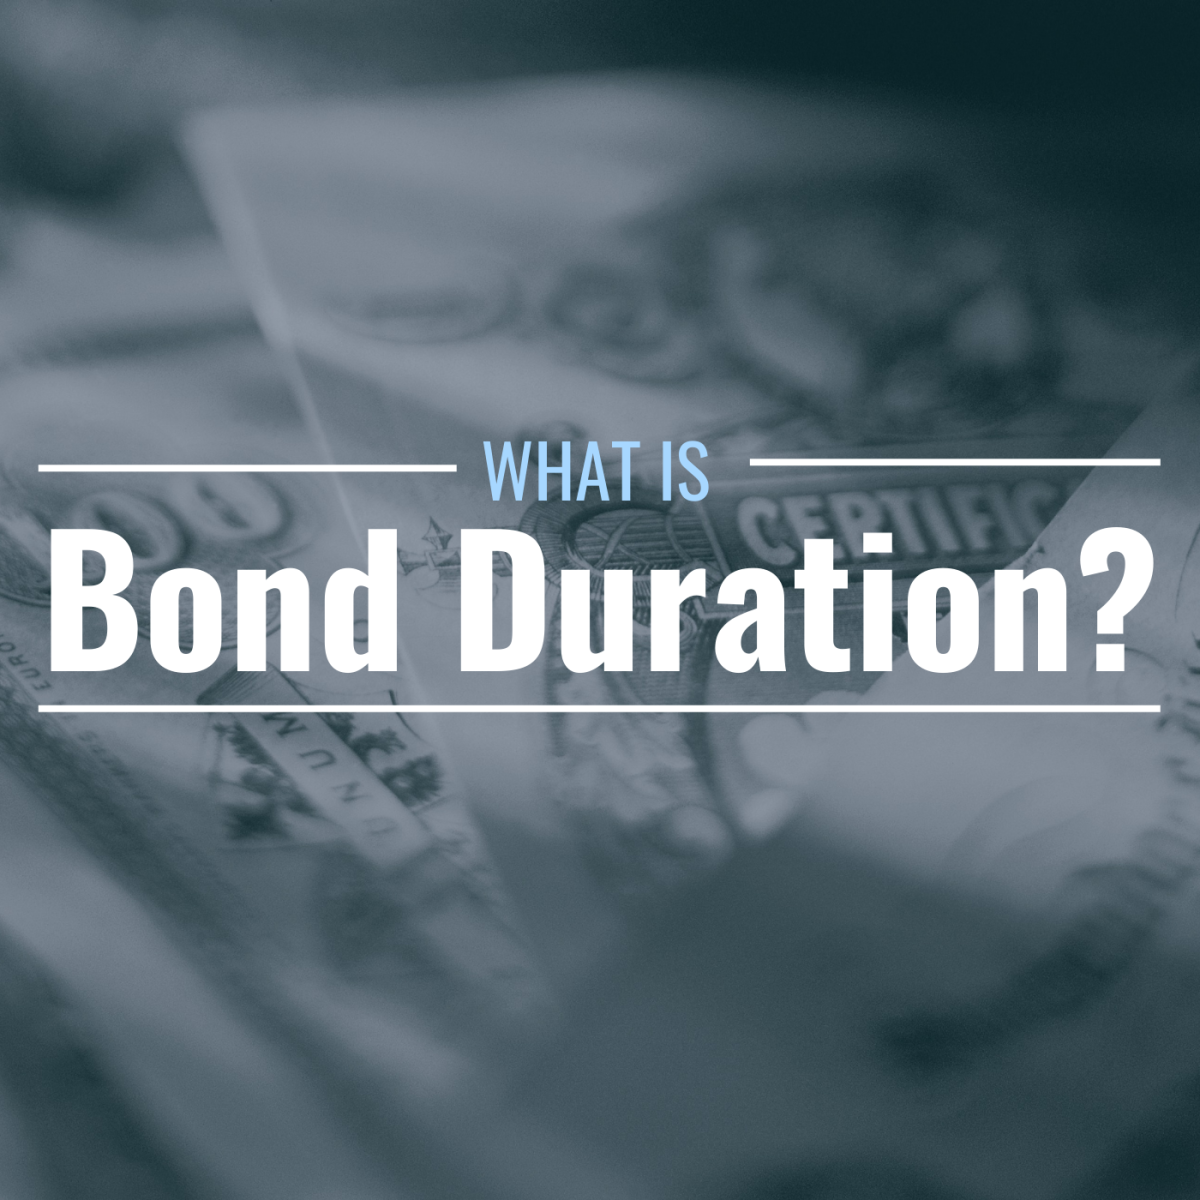 Bond certificate with the text overlay: "What Is Bond Duration?"